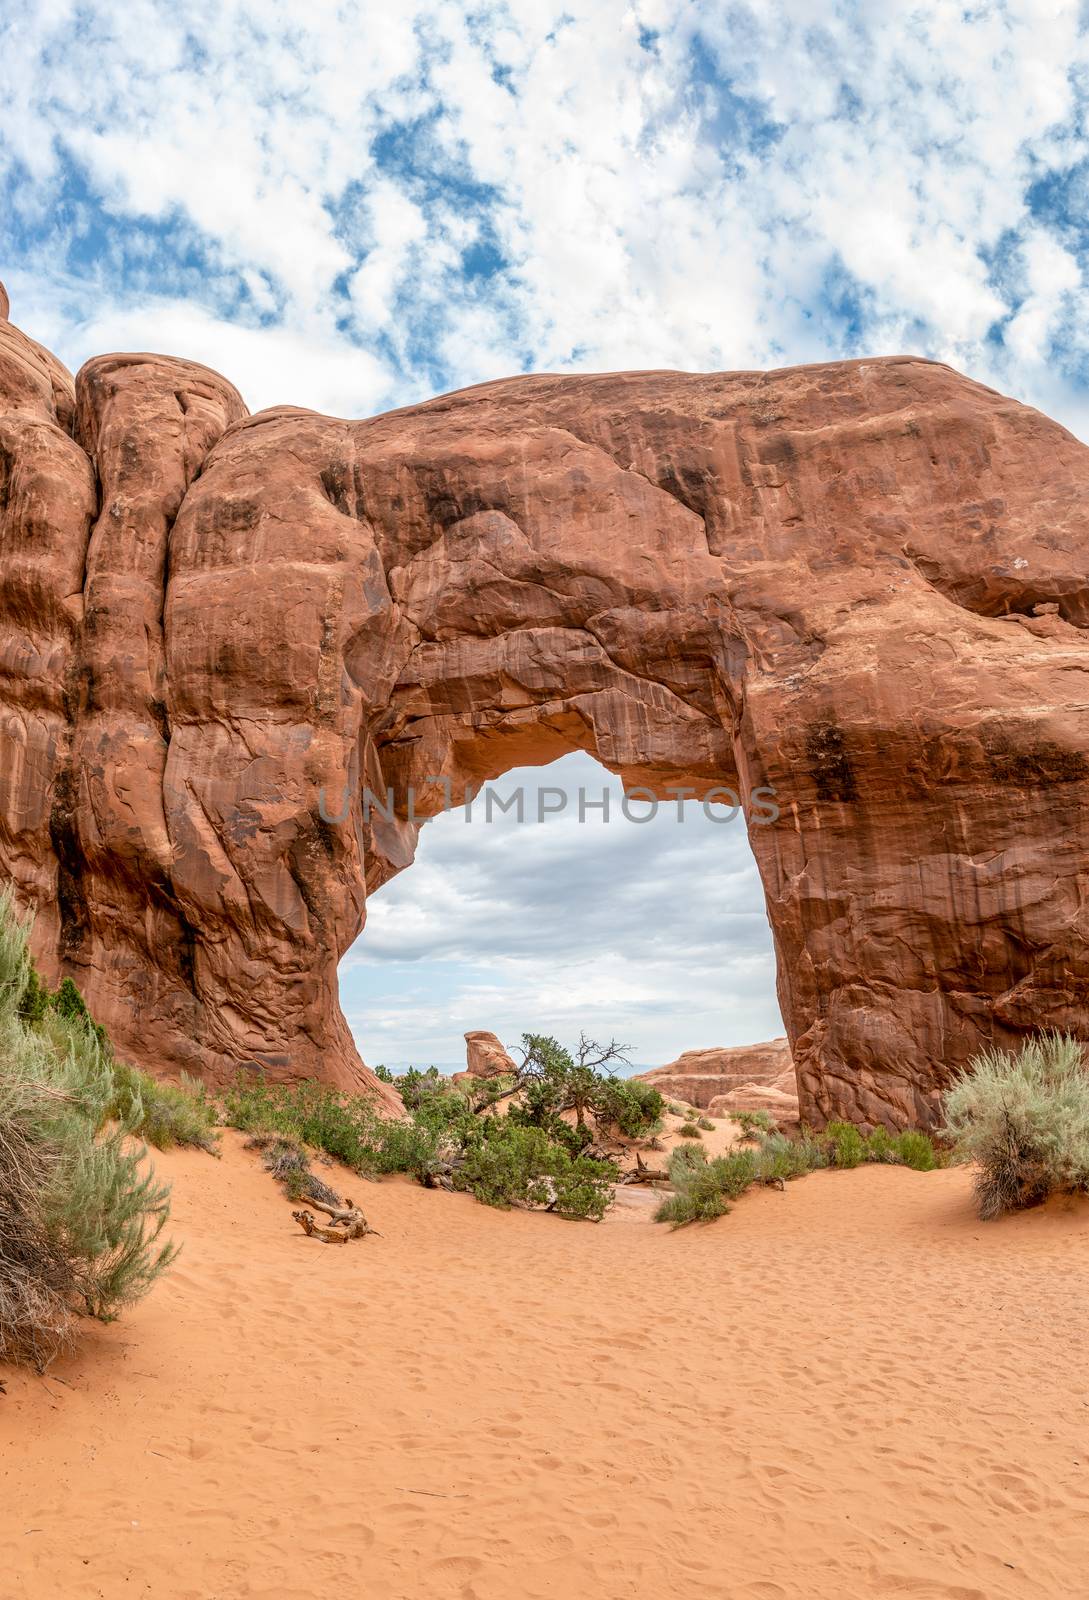 Pine Tree Arch off Devils Garden Trail in Arches National Park, Utah